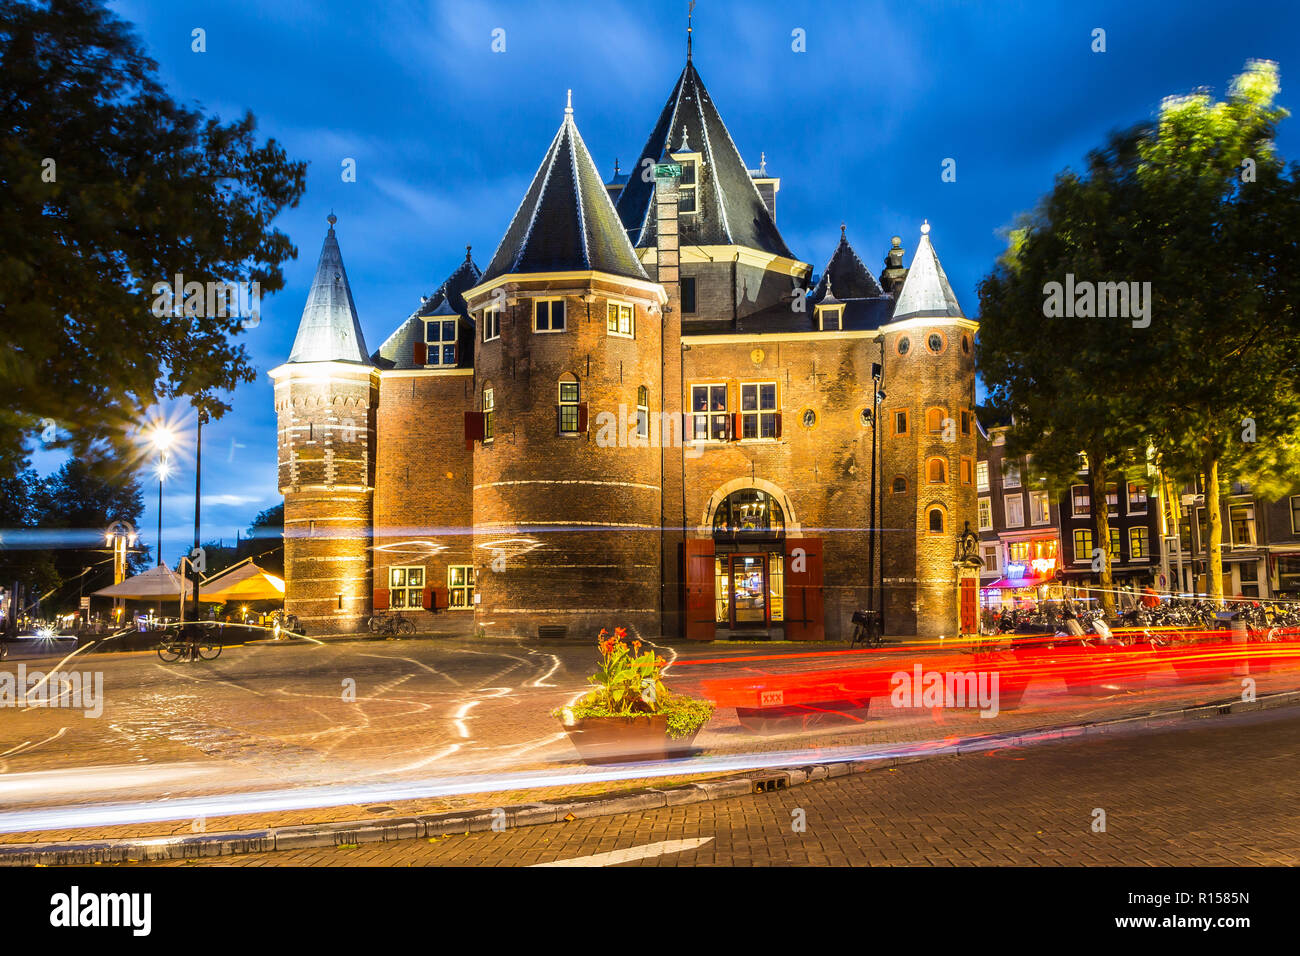 AMSTERDAM, THE NETHERLANDS - September 7, 2018: Amsterdam: famous 'Waag' city gate at night. Stock Photo